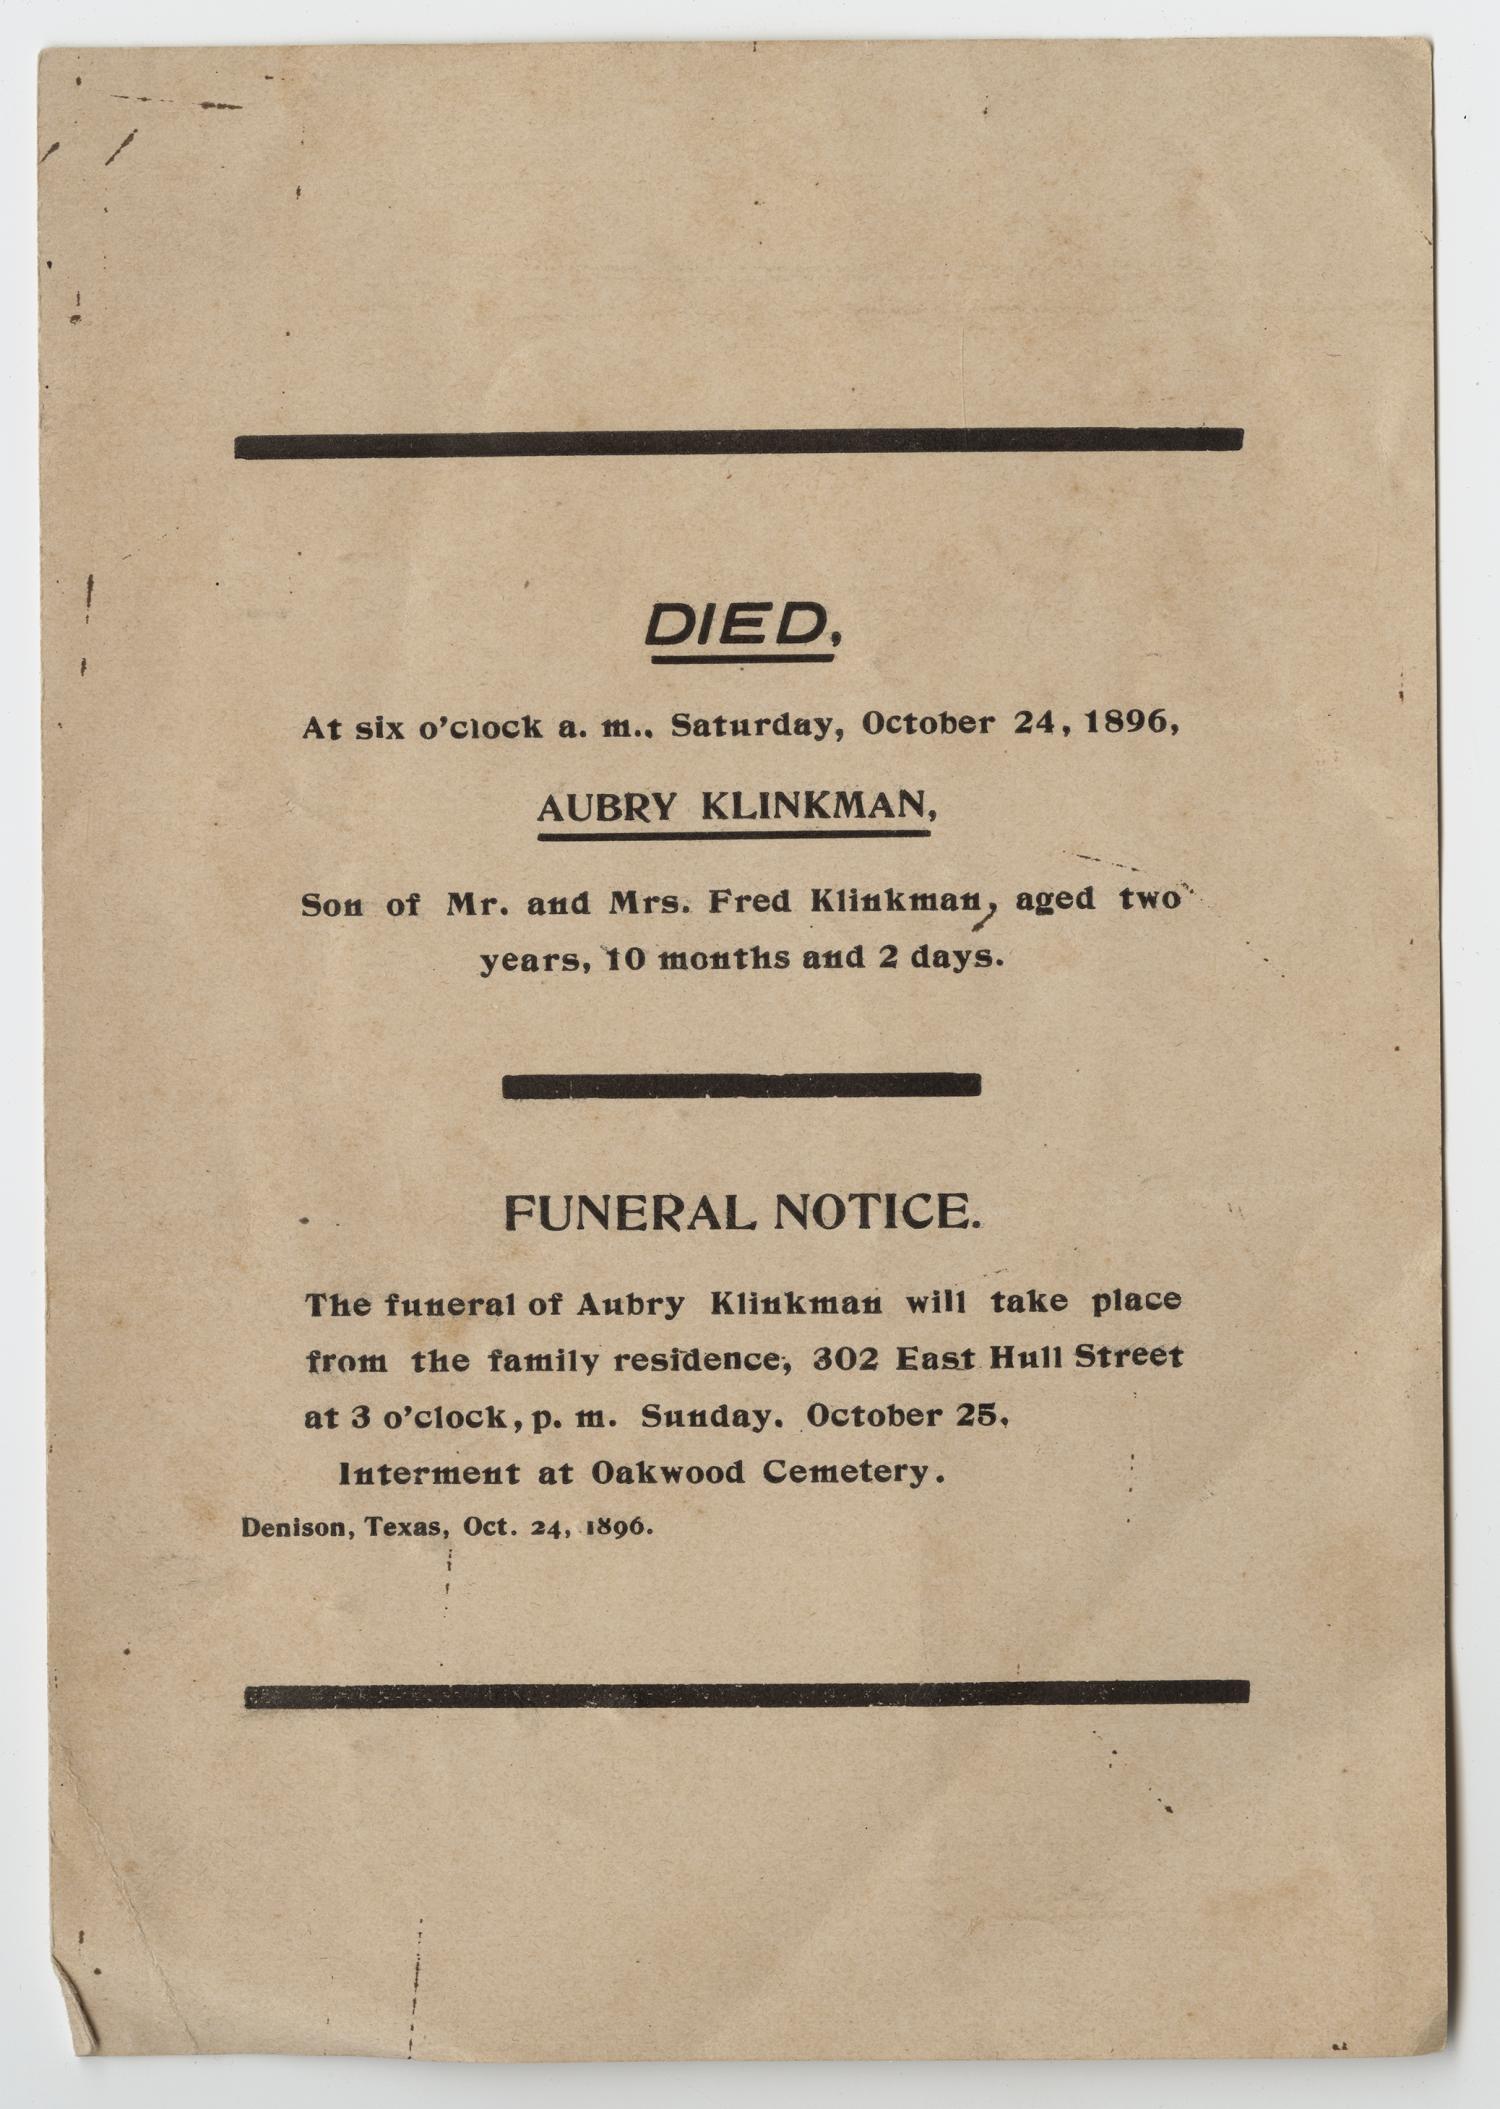 Funeral Notice For Aubry Klinkman The Portal To Texas History